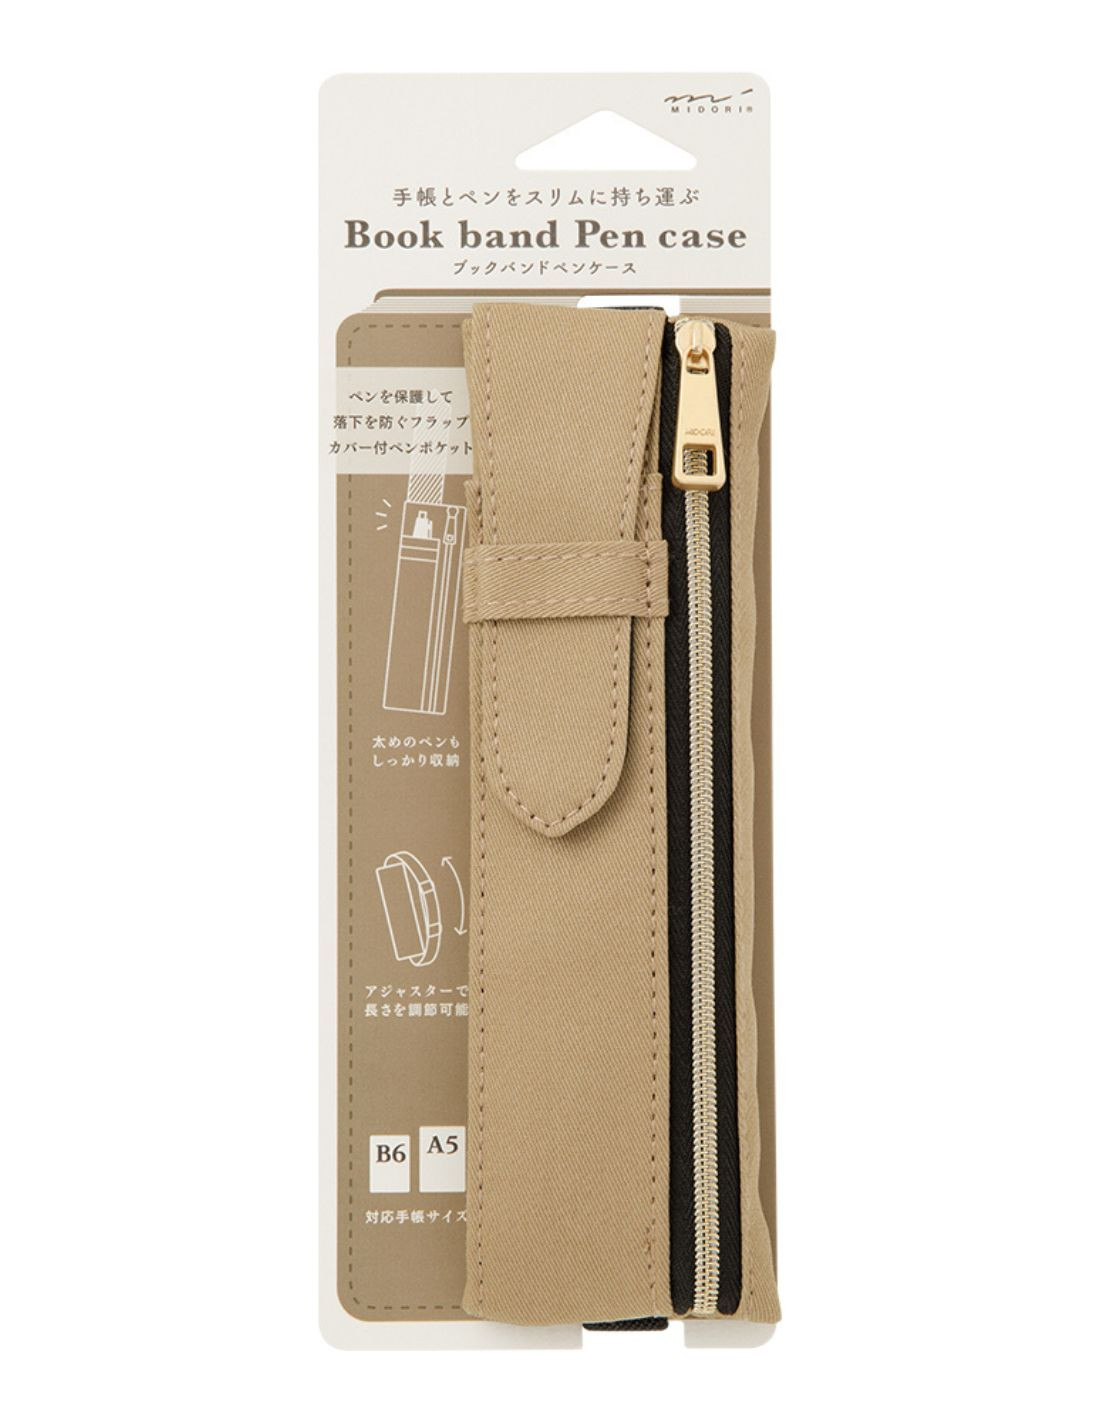 Book Band Pen Case for A5 and B6 notebooks - Beige - Midori